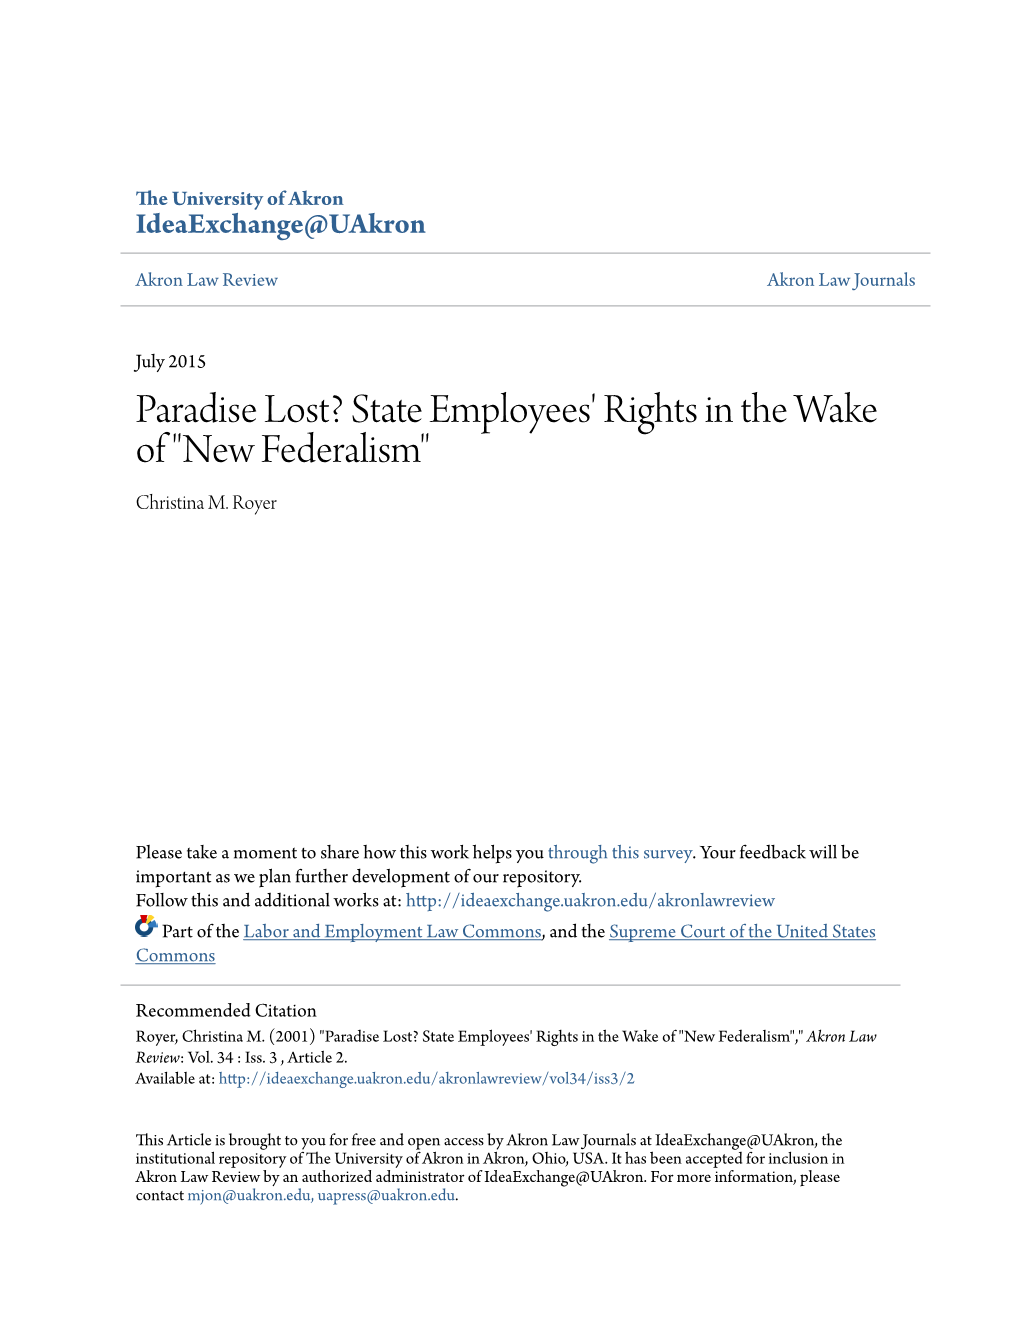 State Employees' Rights in the Wake of "New Federalism" Christina M